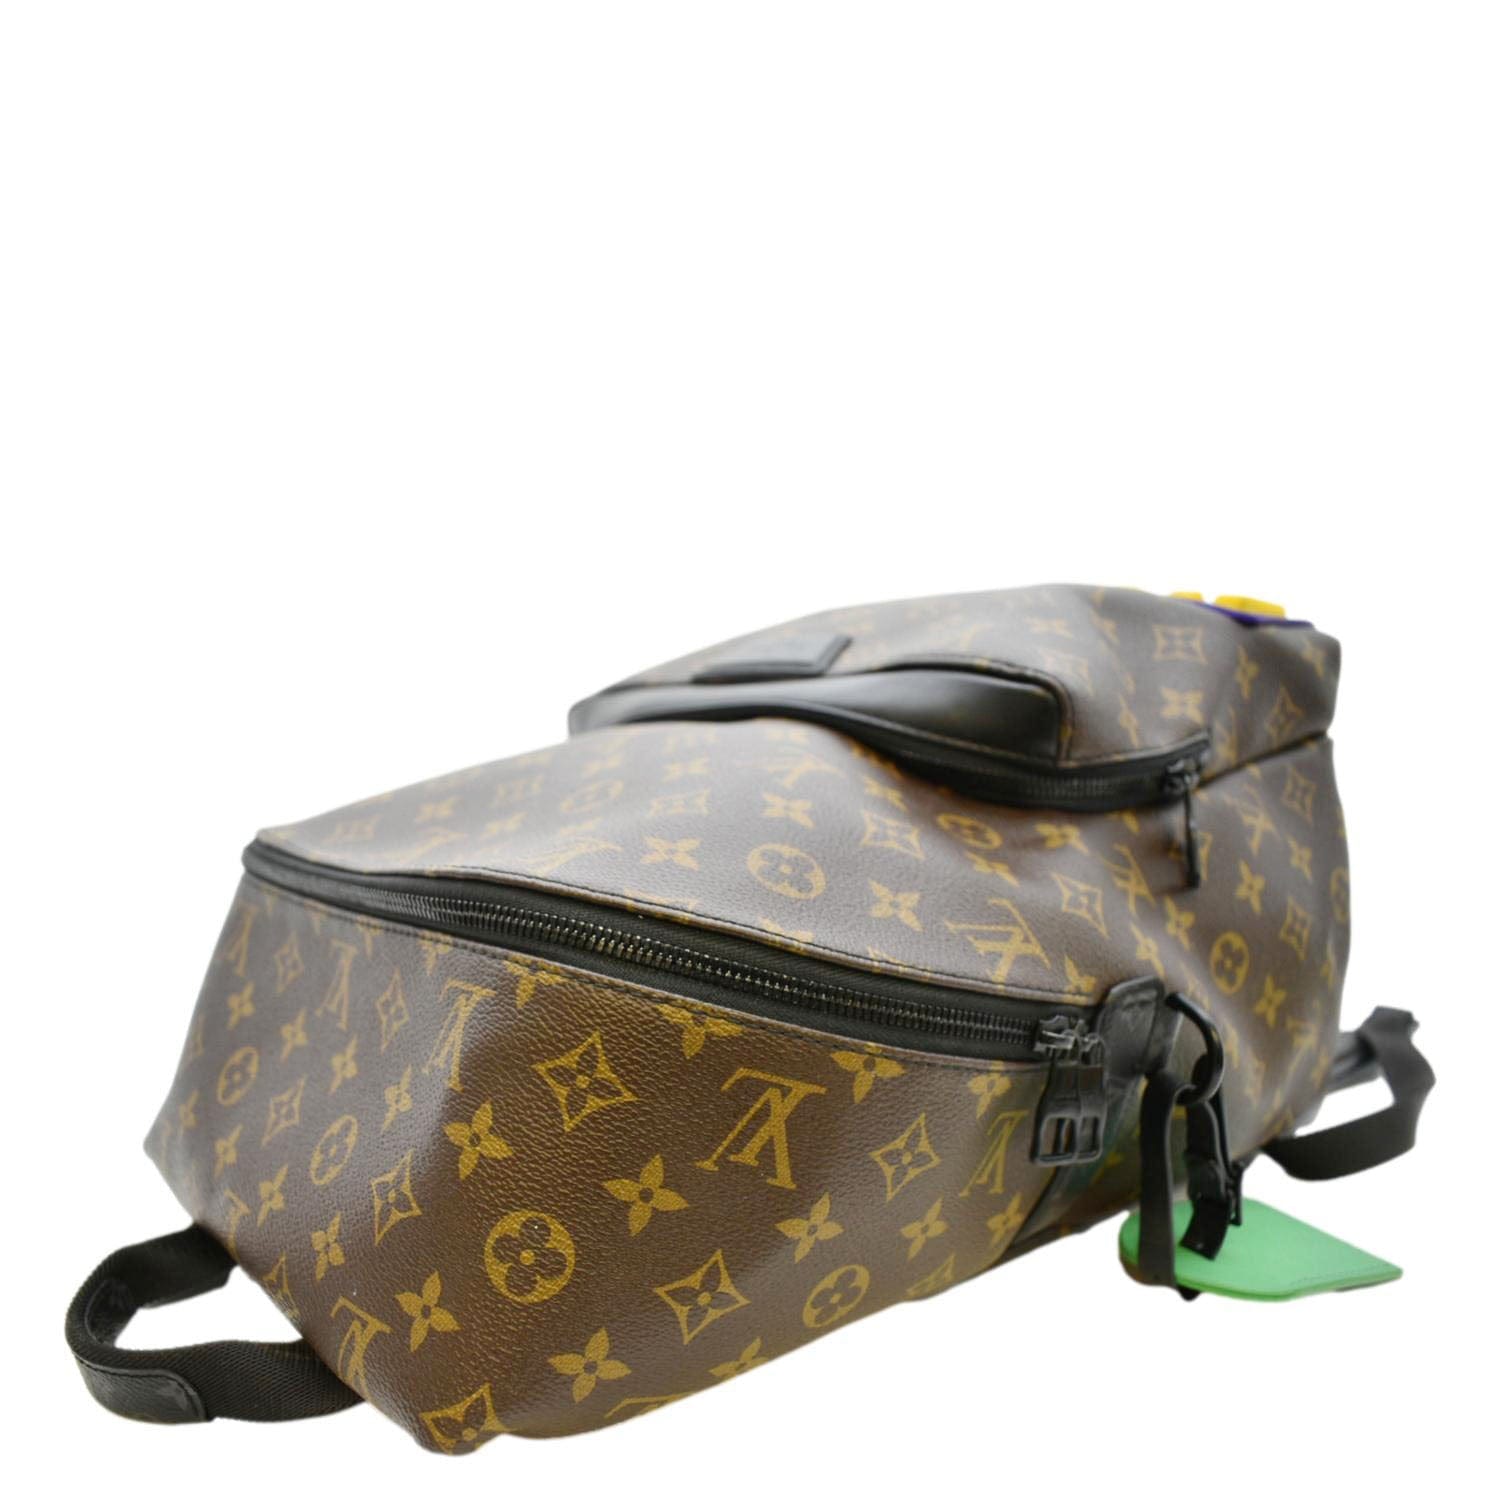 LOUIS VUITTON Monogram LV Rubber Discovery Backpack Multicolor 1191064